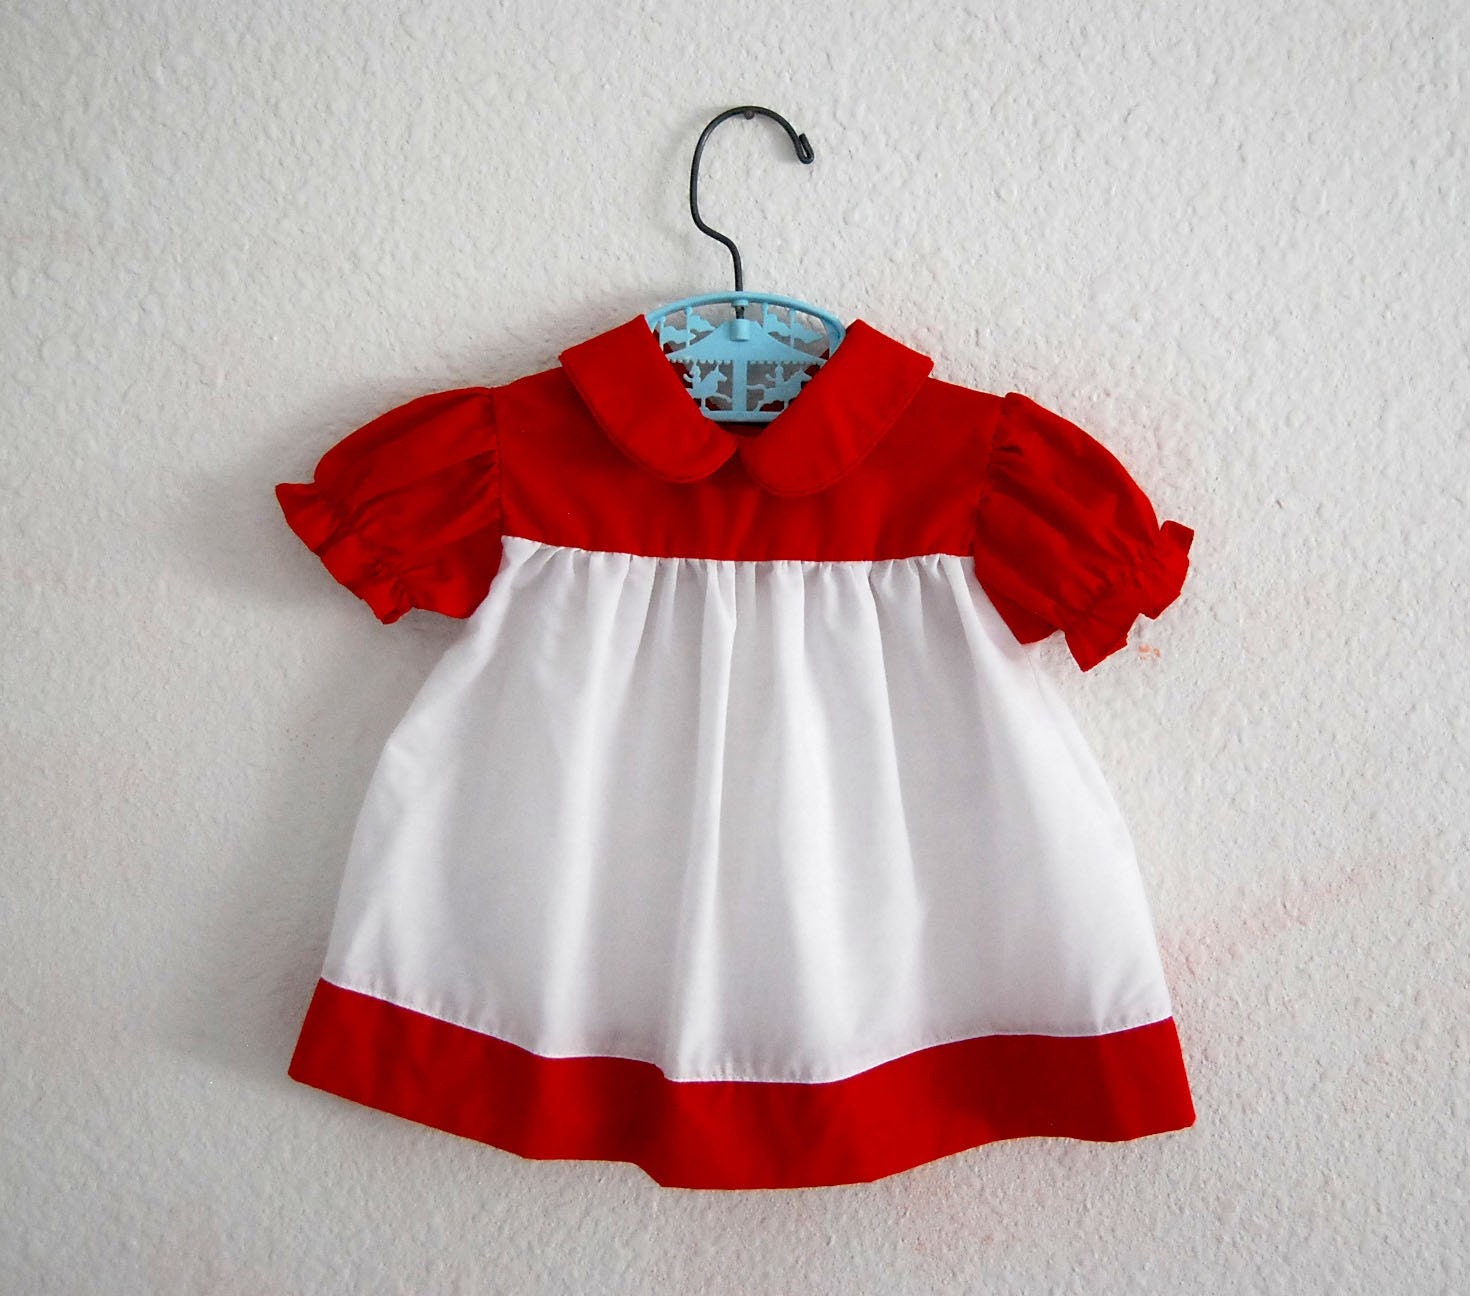 BABY n RED...vintage red and white ruffled dress